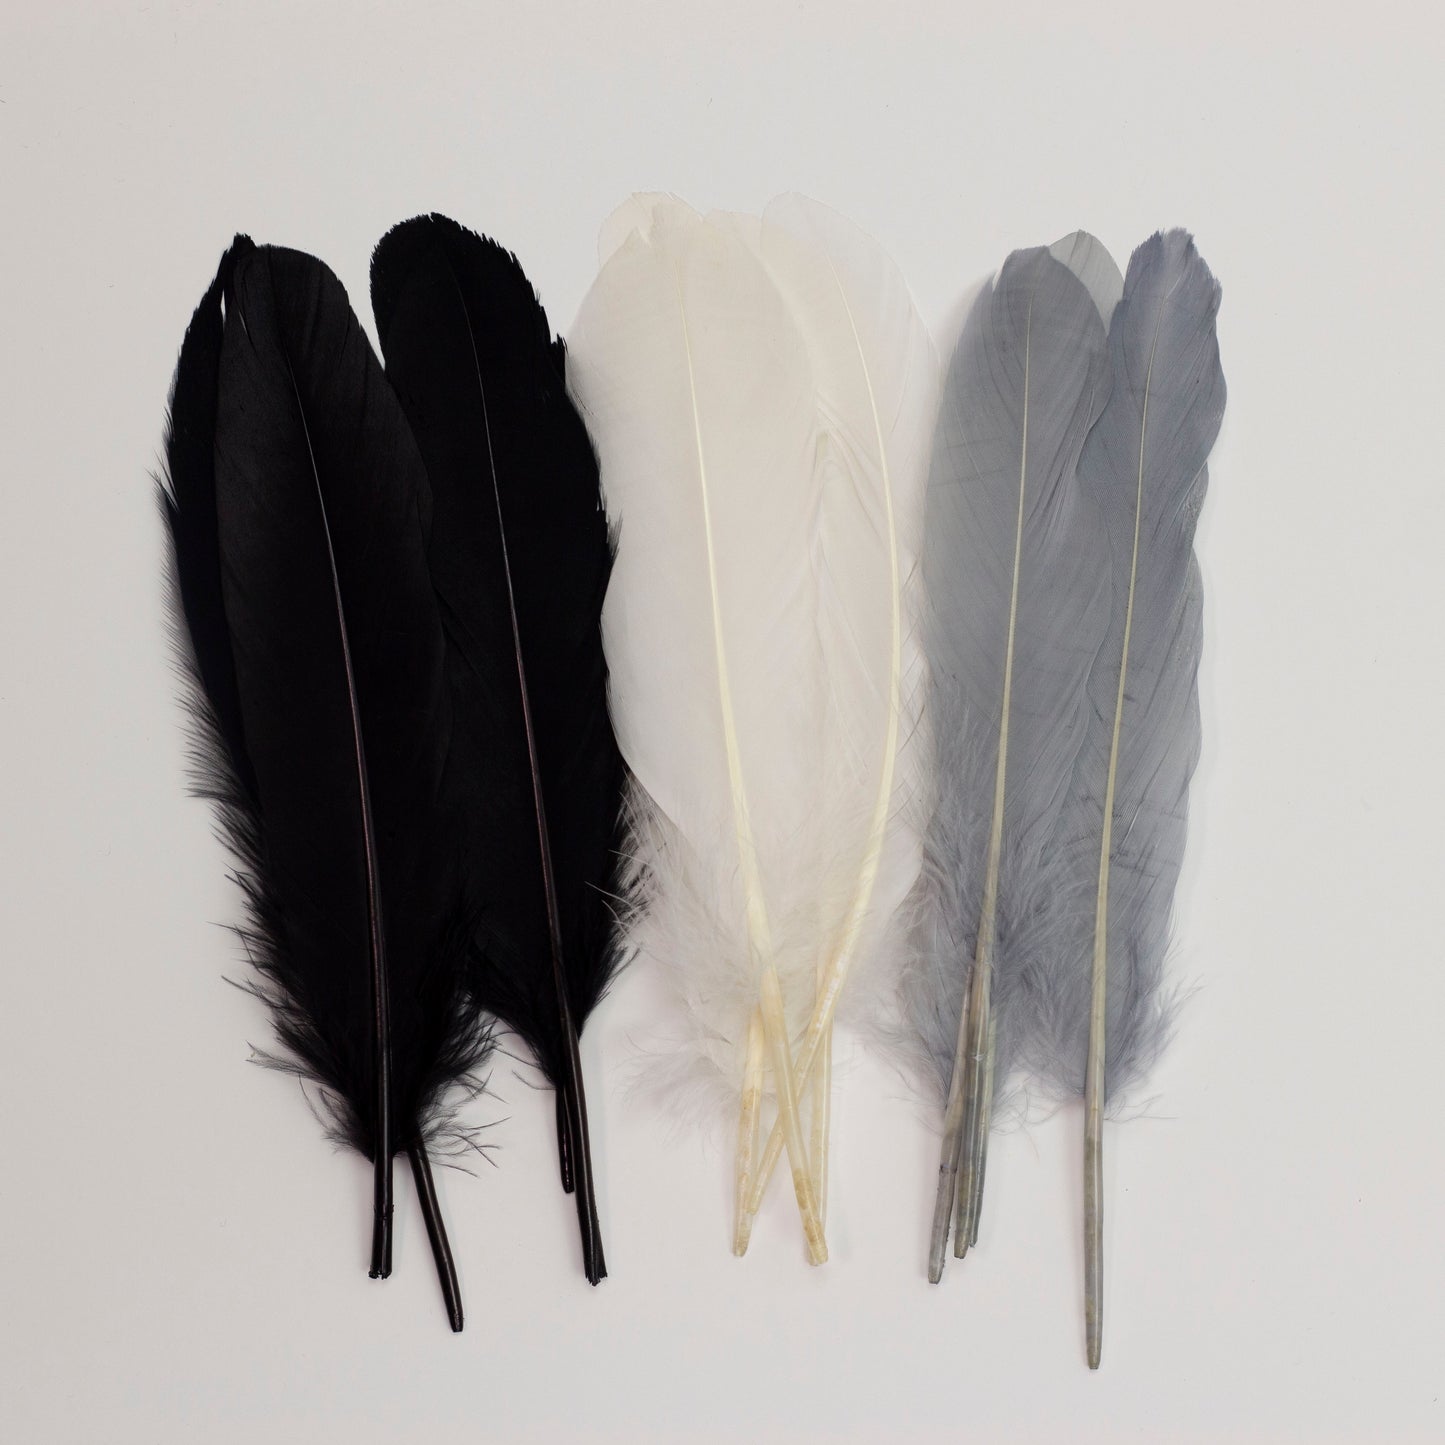 Goose Feathers 7-8" - 12 pcs - Black and White